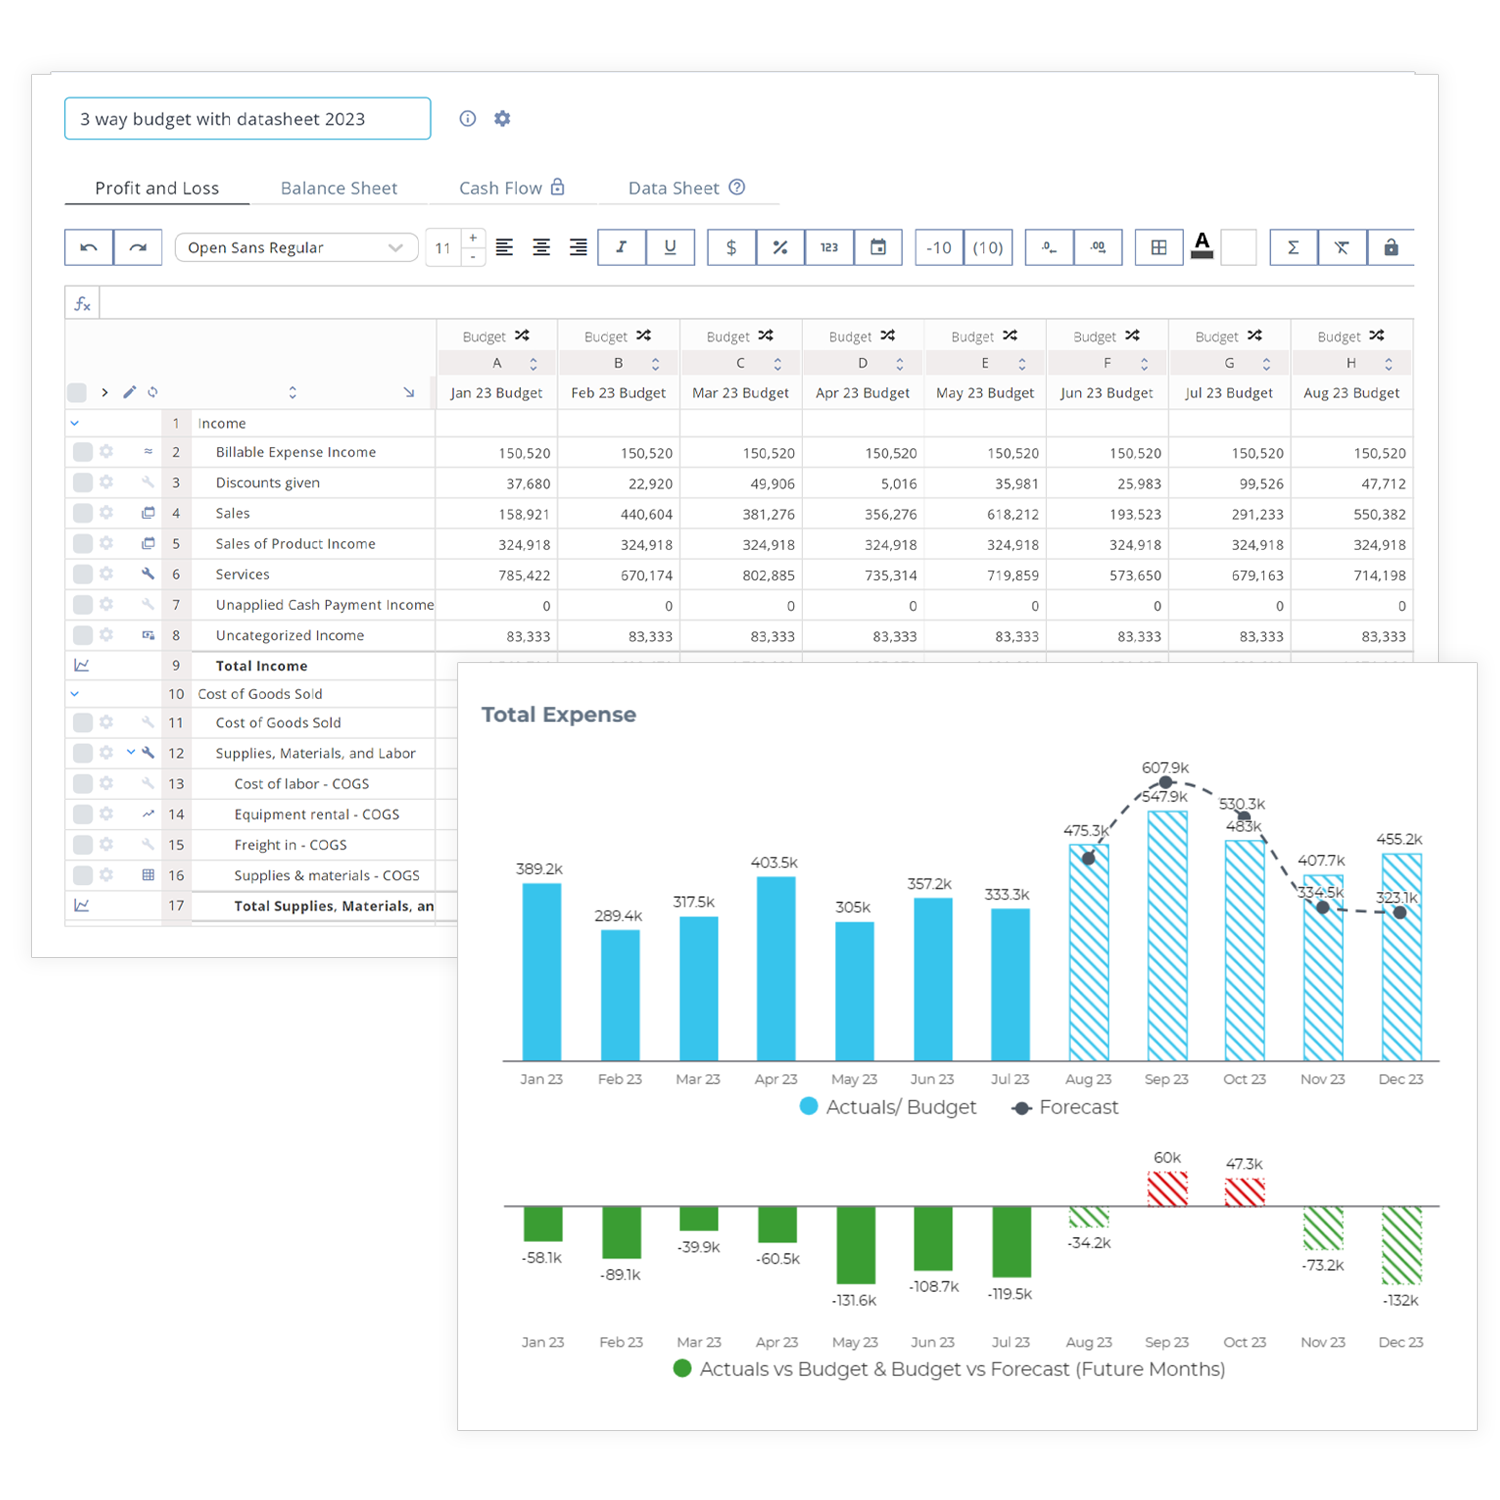 Benefit from seamless planning within a familiar spreadsheet environment. Leverage automatic Balance Sheet and Cash Flow Forecasting with our powerful yet flexible 3-Way FP&A feature.